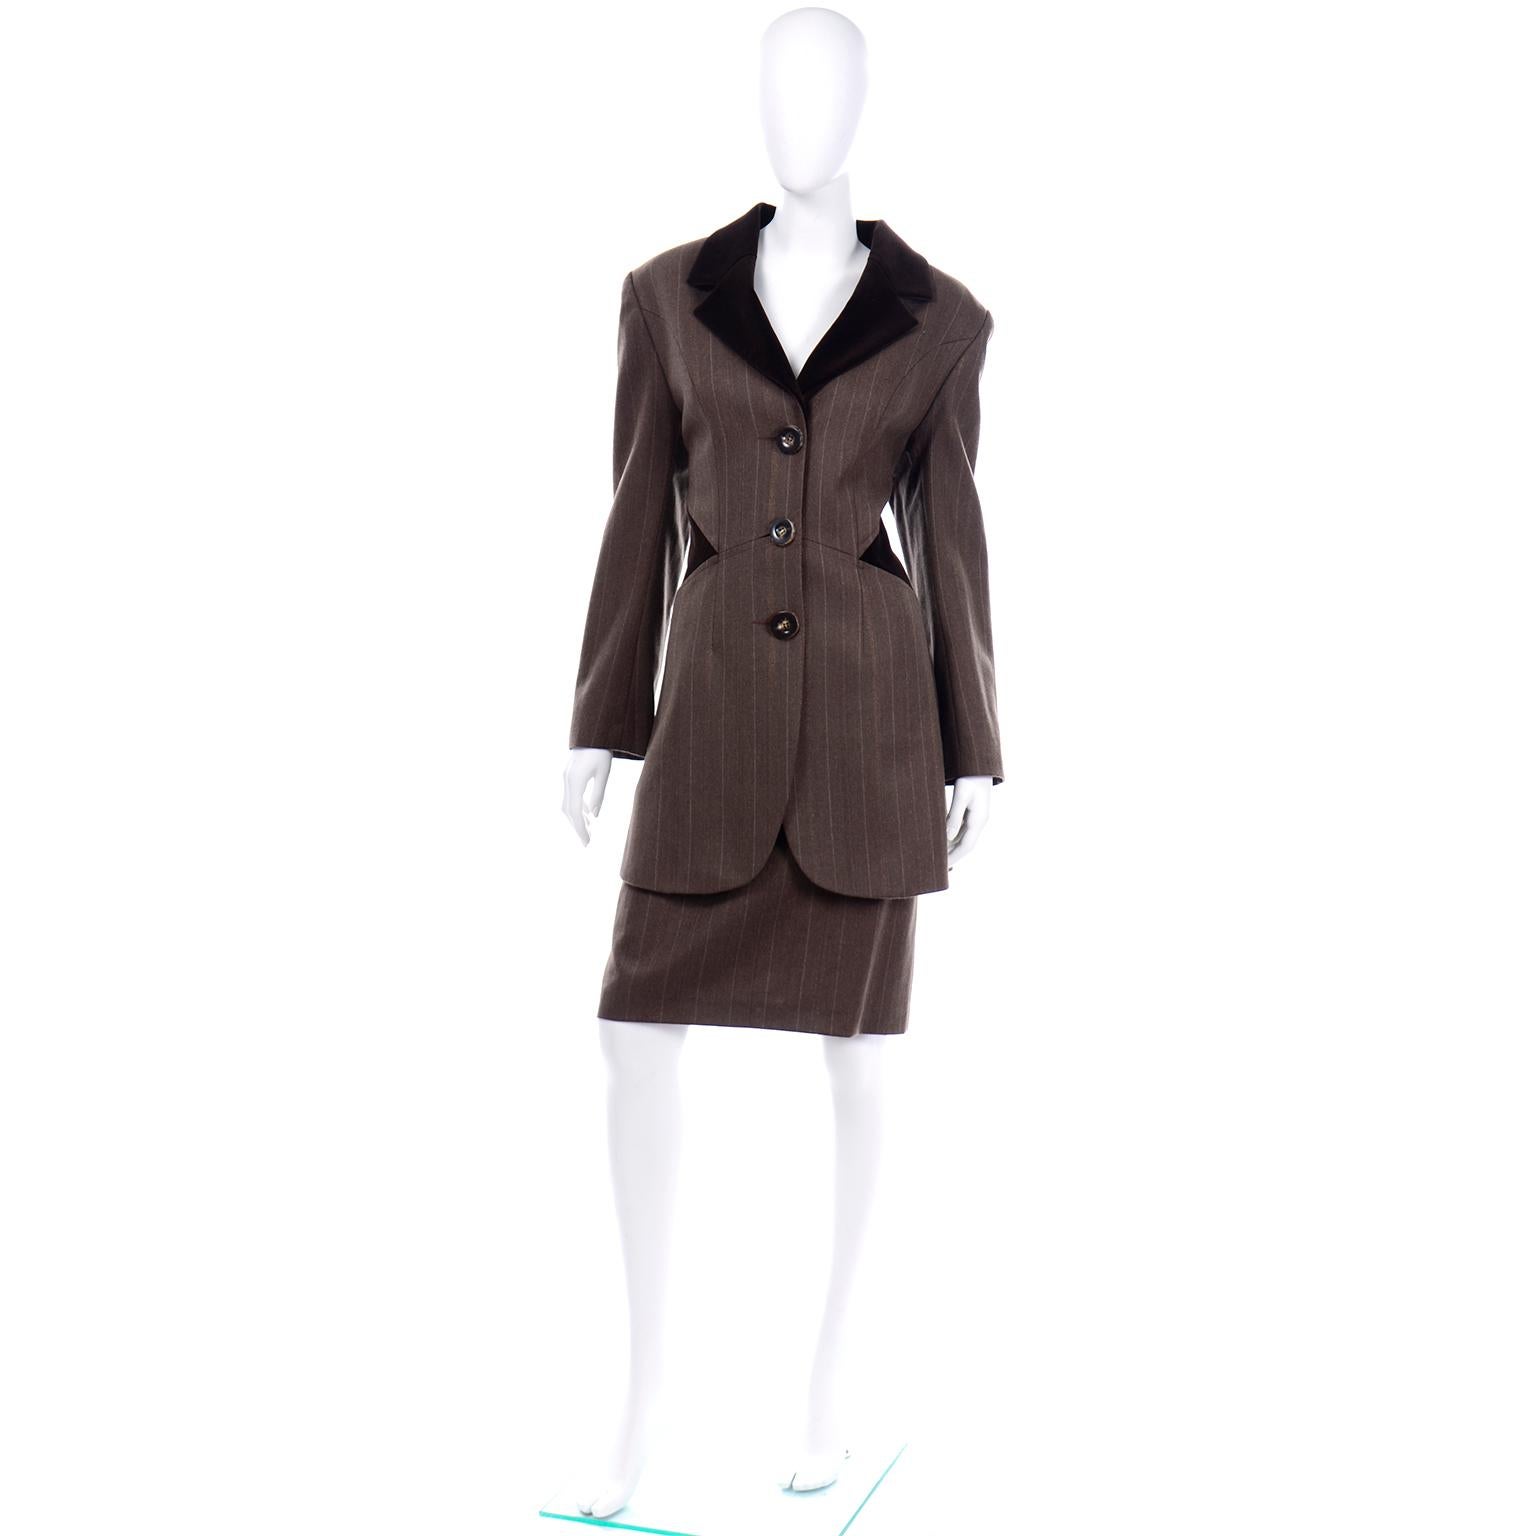 This vintage Tomasz Starzewski skirt suit includes a really fabulous equestrian style longline coat and a slim skirt. The lapels of the coat are brown cotton velvet and there  is also a diamond velvet detail along the sides of the waist. The pin